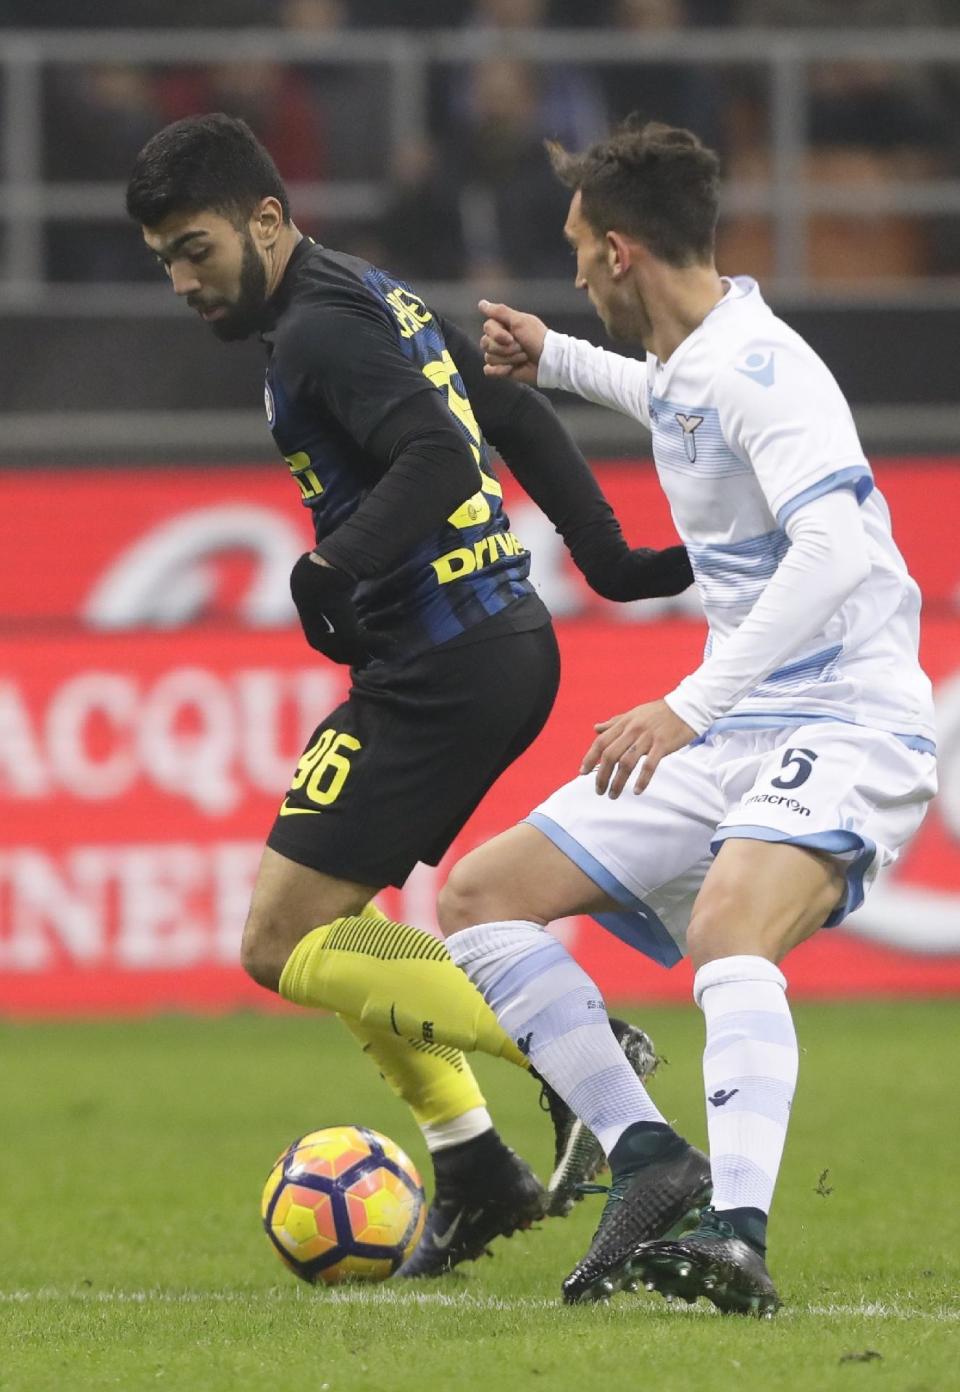 Inter Milan's Gabriel Barbosa, left, controls the ball past Lazio's Dino Cataldi during a Serie A soccer match between Inter Milan and Lazio, at the San Siro stadium in Milan, Italy, Wednesday, Dec. 21, 2016. (AP Photo/Luca Bruno)